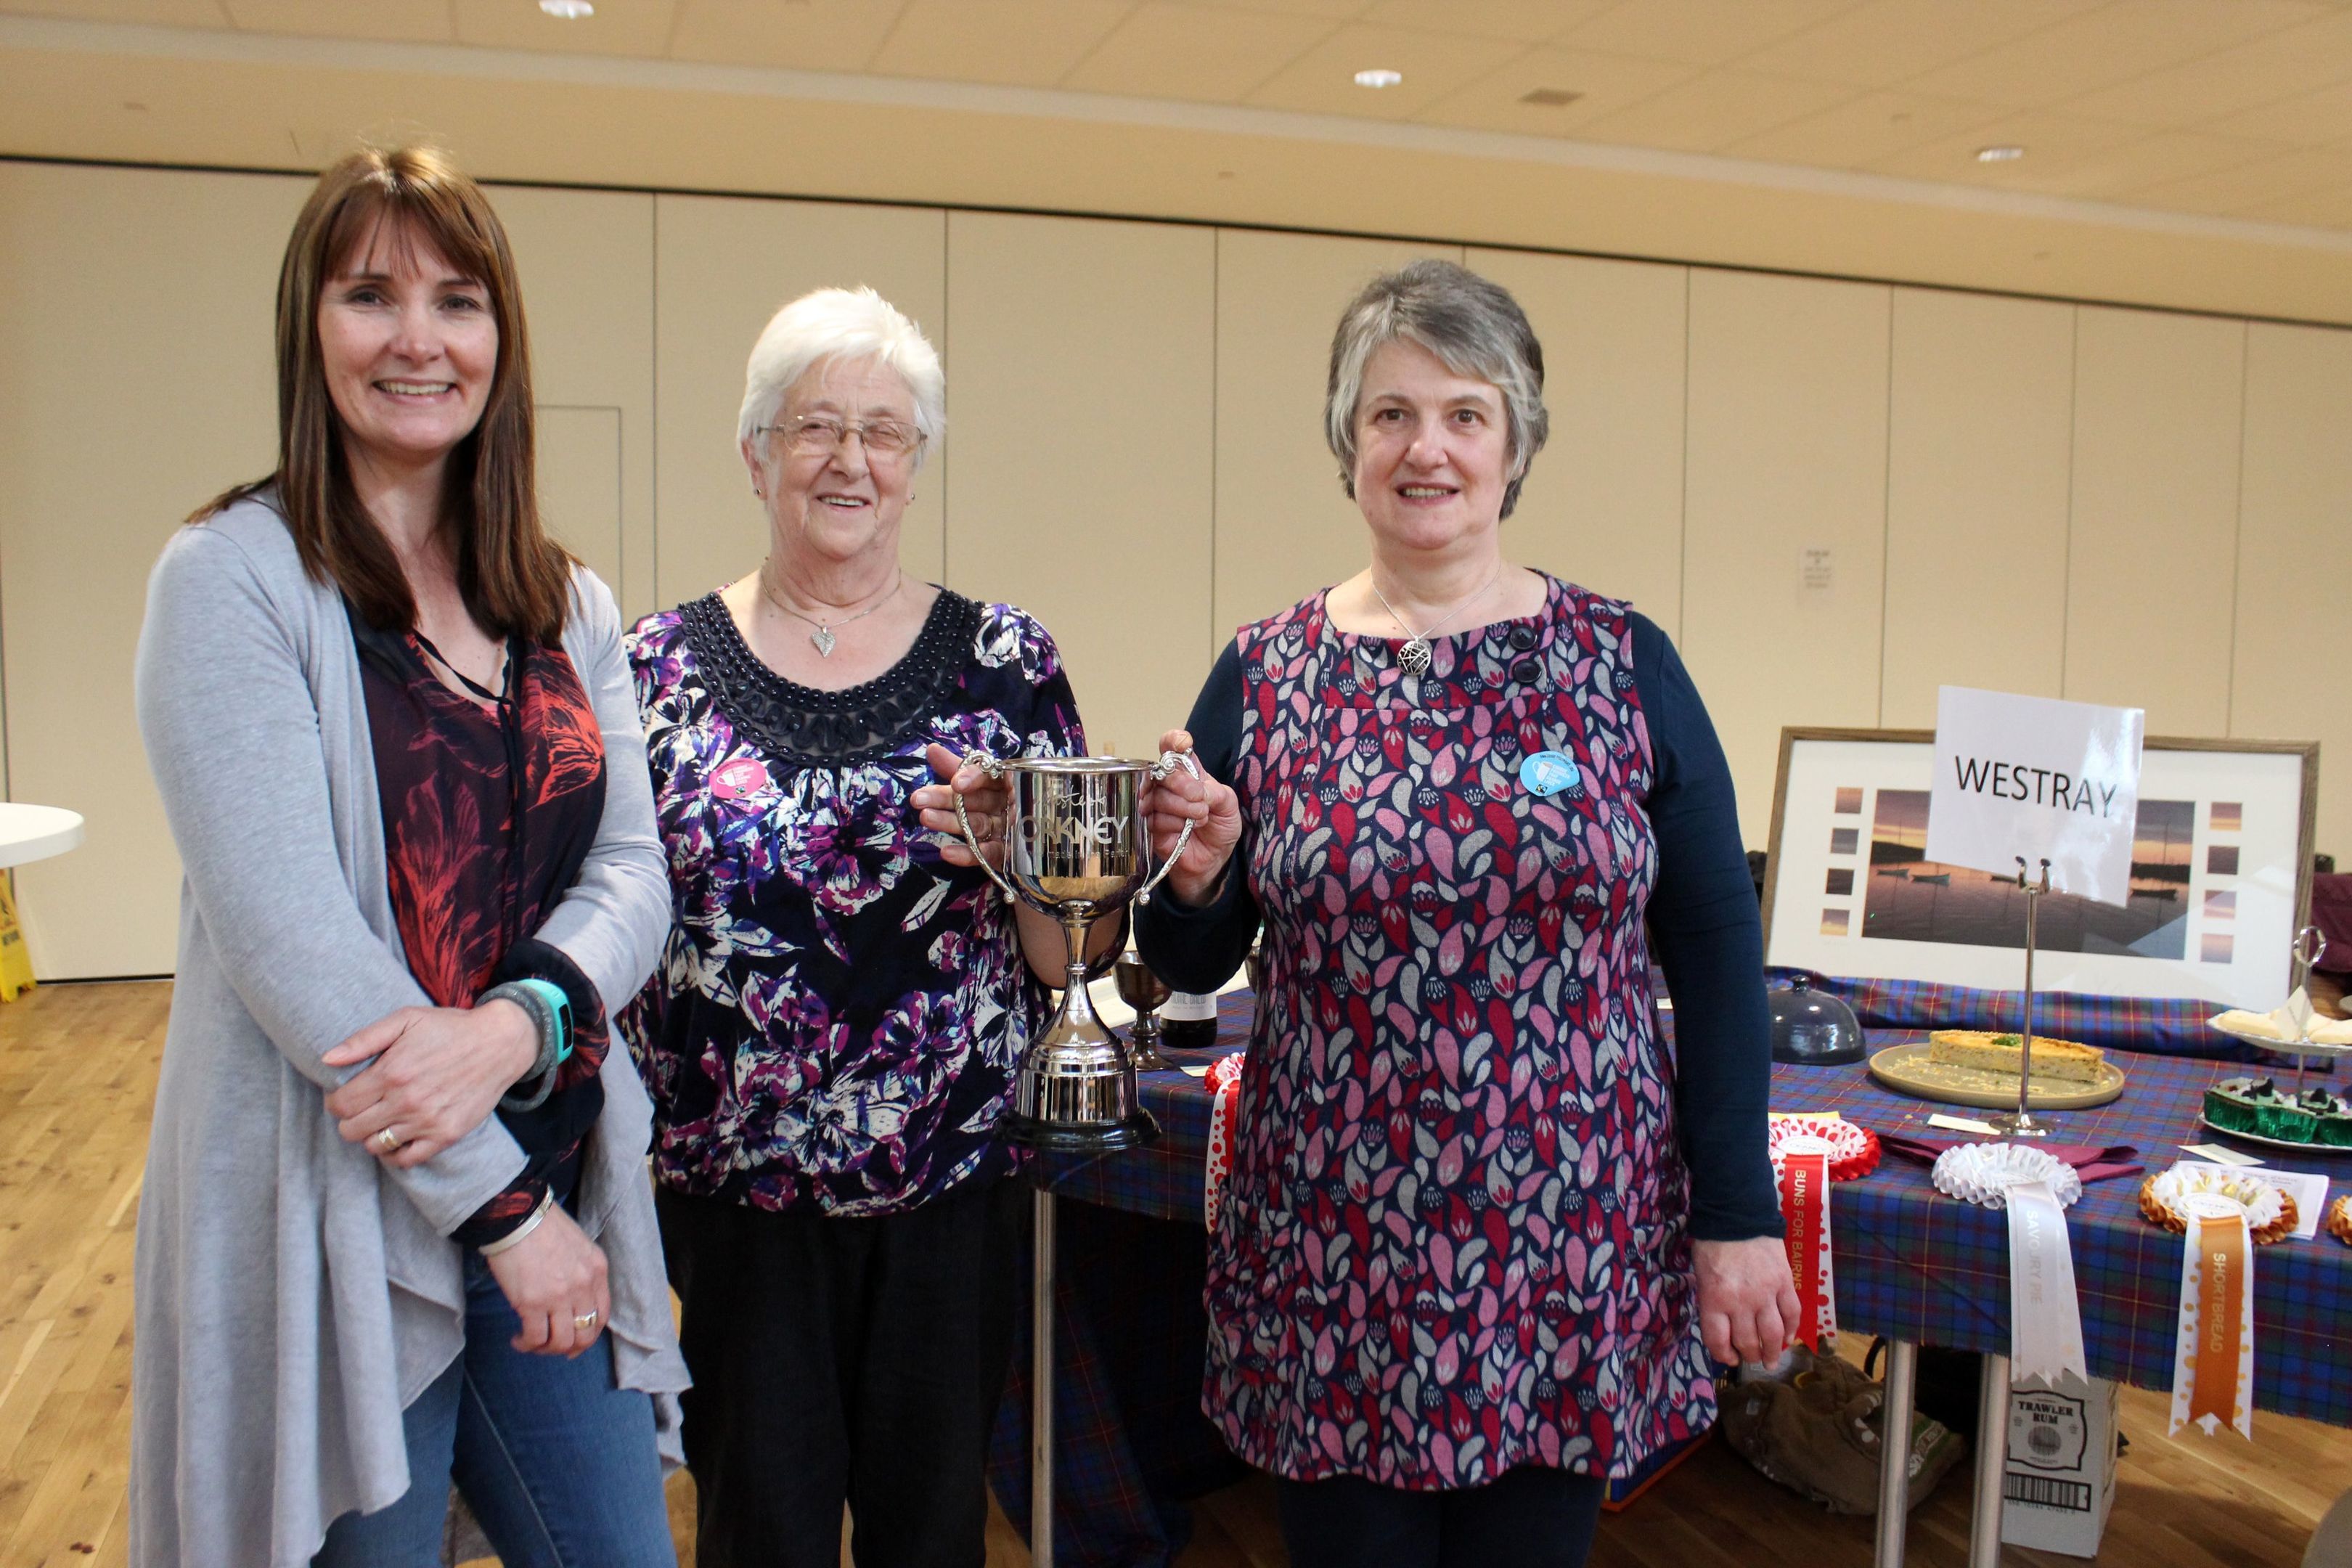 Westray representatives Ena Fergus (left) and Netta Harcus (right), receiving the Homemade in the Parish cup from OFD’s Fiona MacInnes (far left)